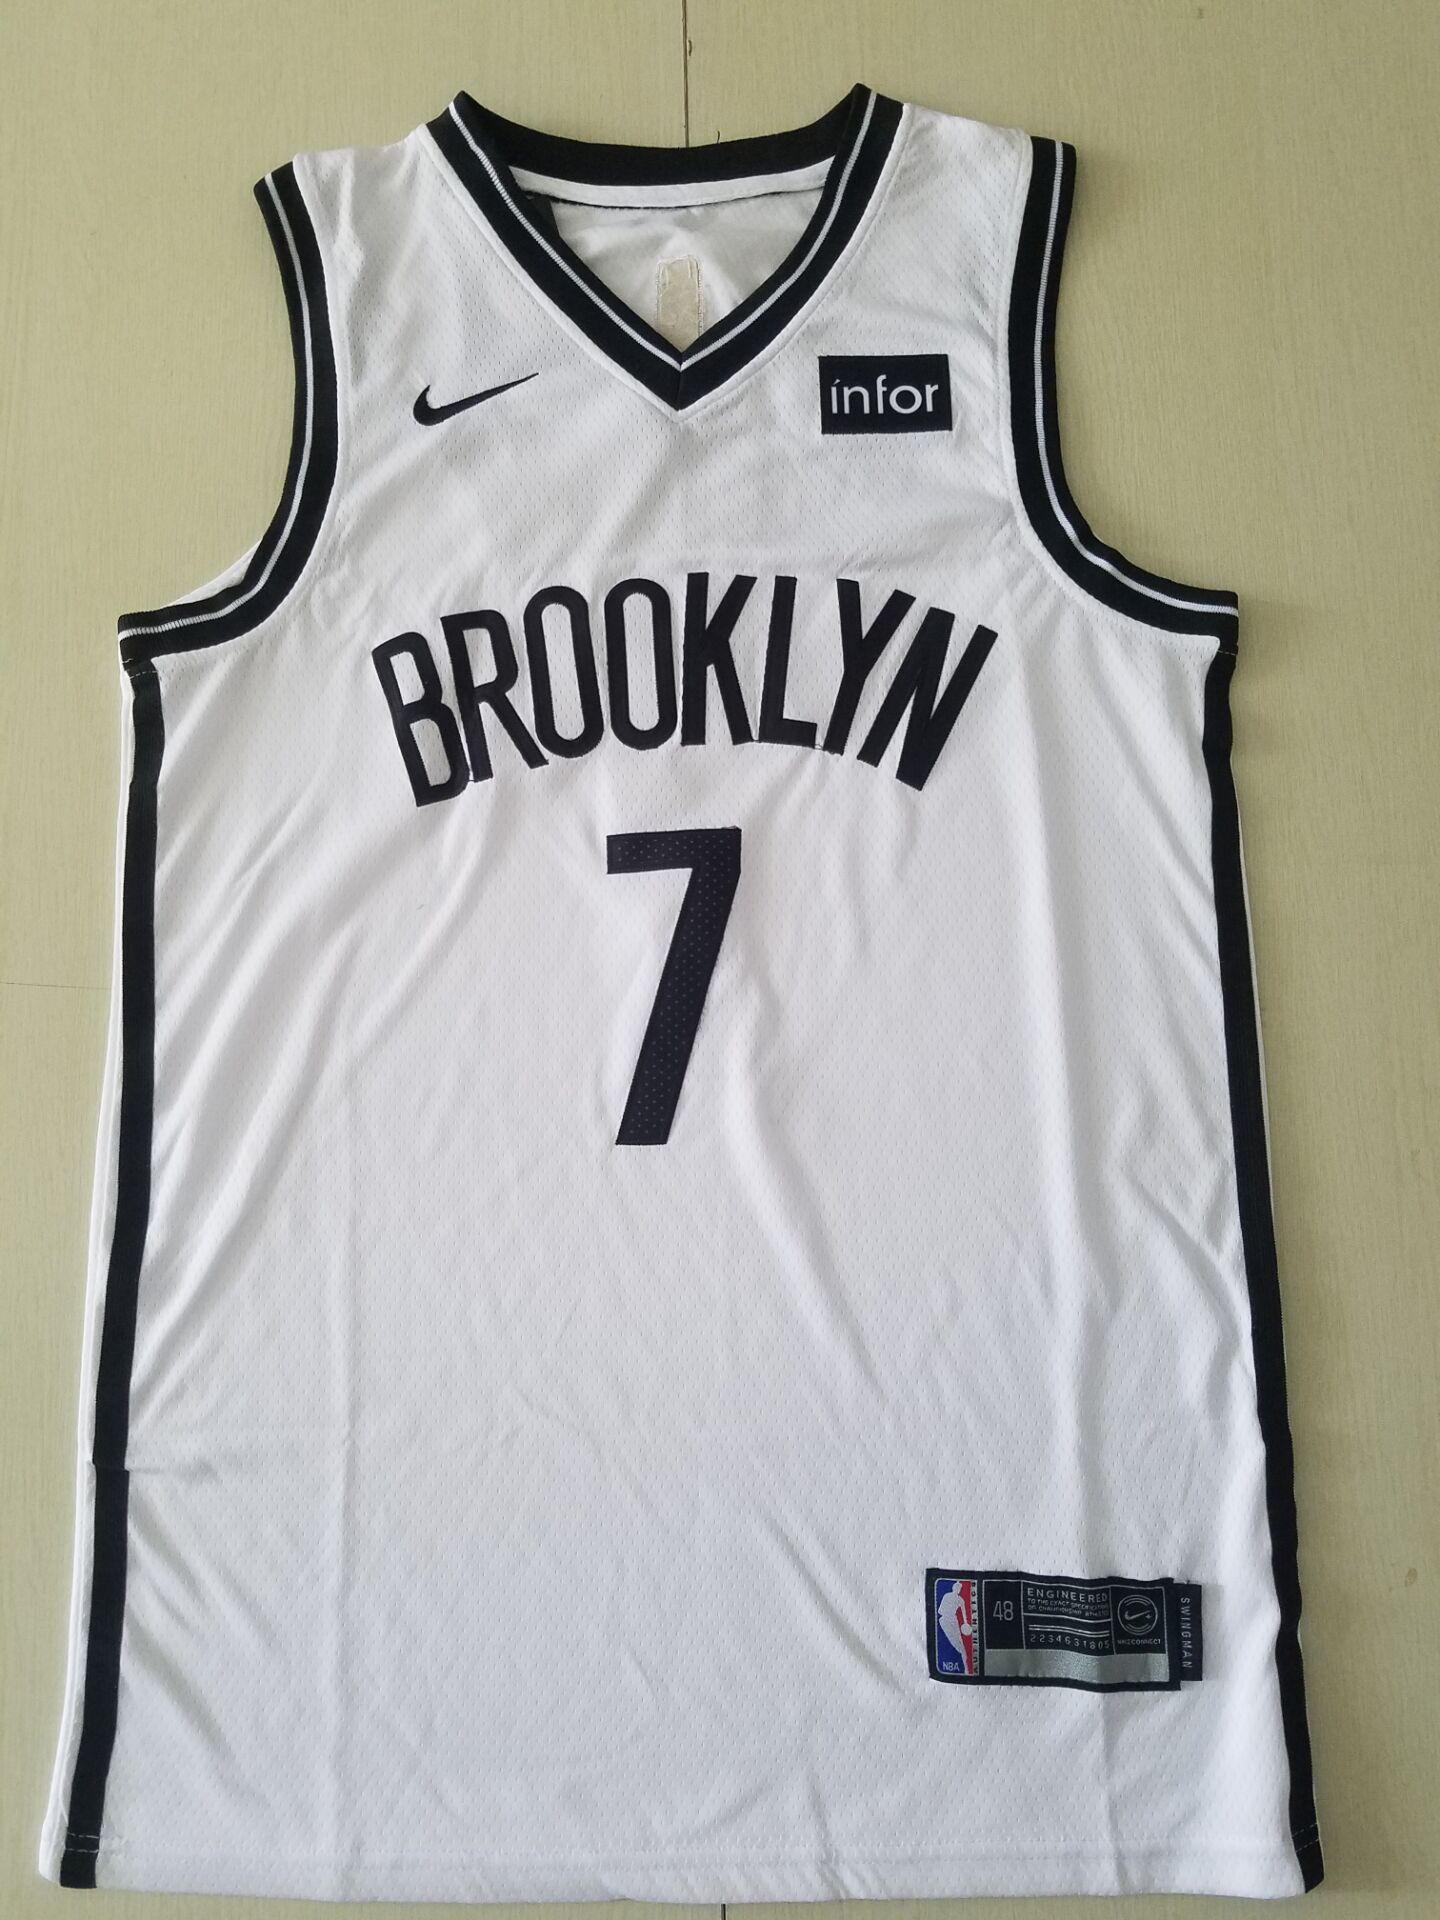 Youth Brooklyn Nets #7 Burant white Nike Game NBA Jerseys->youth nfl jersey->Youth Jersey